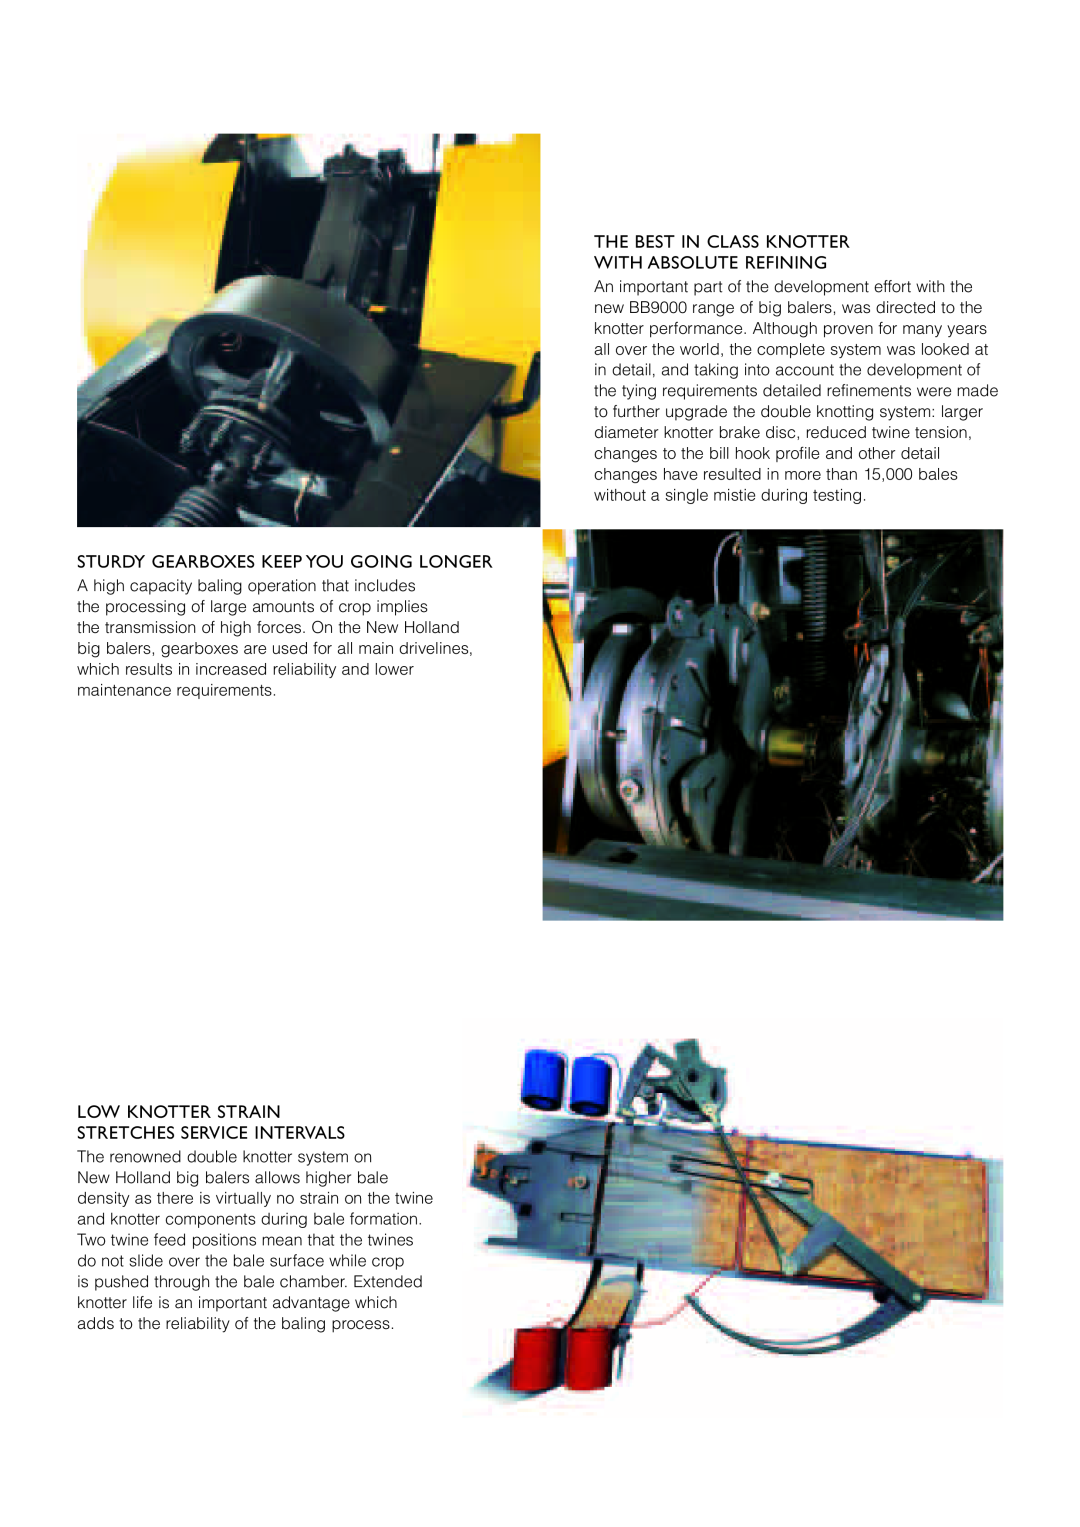 New Holland BB9O6O, BB9OOO, BB9O8O Sturdy Gearboxes Keep You Going Longer, Low Knotter Strain Stretches Service Intervals 